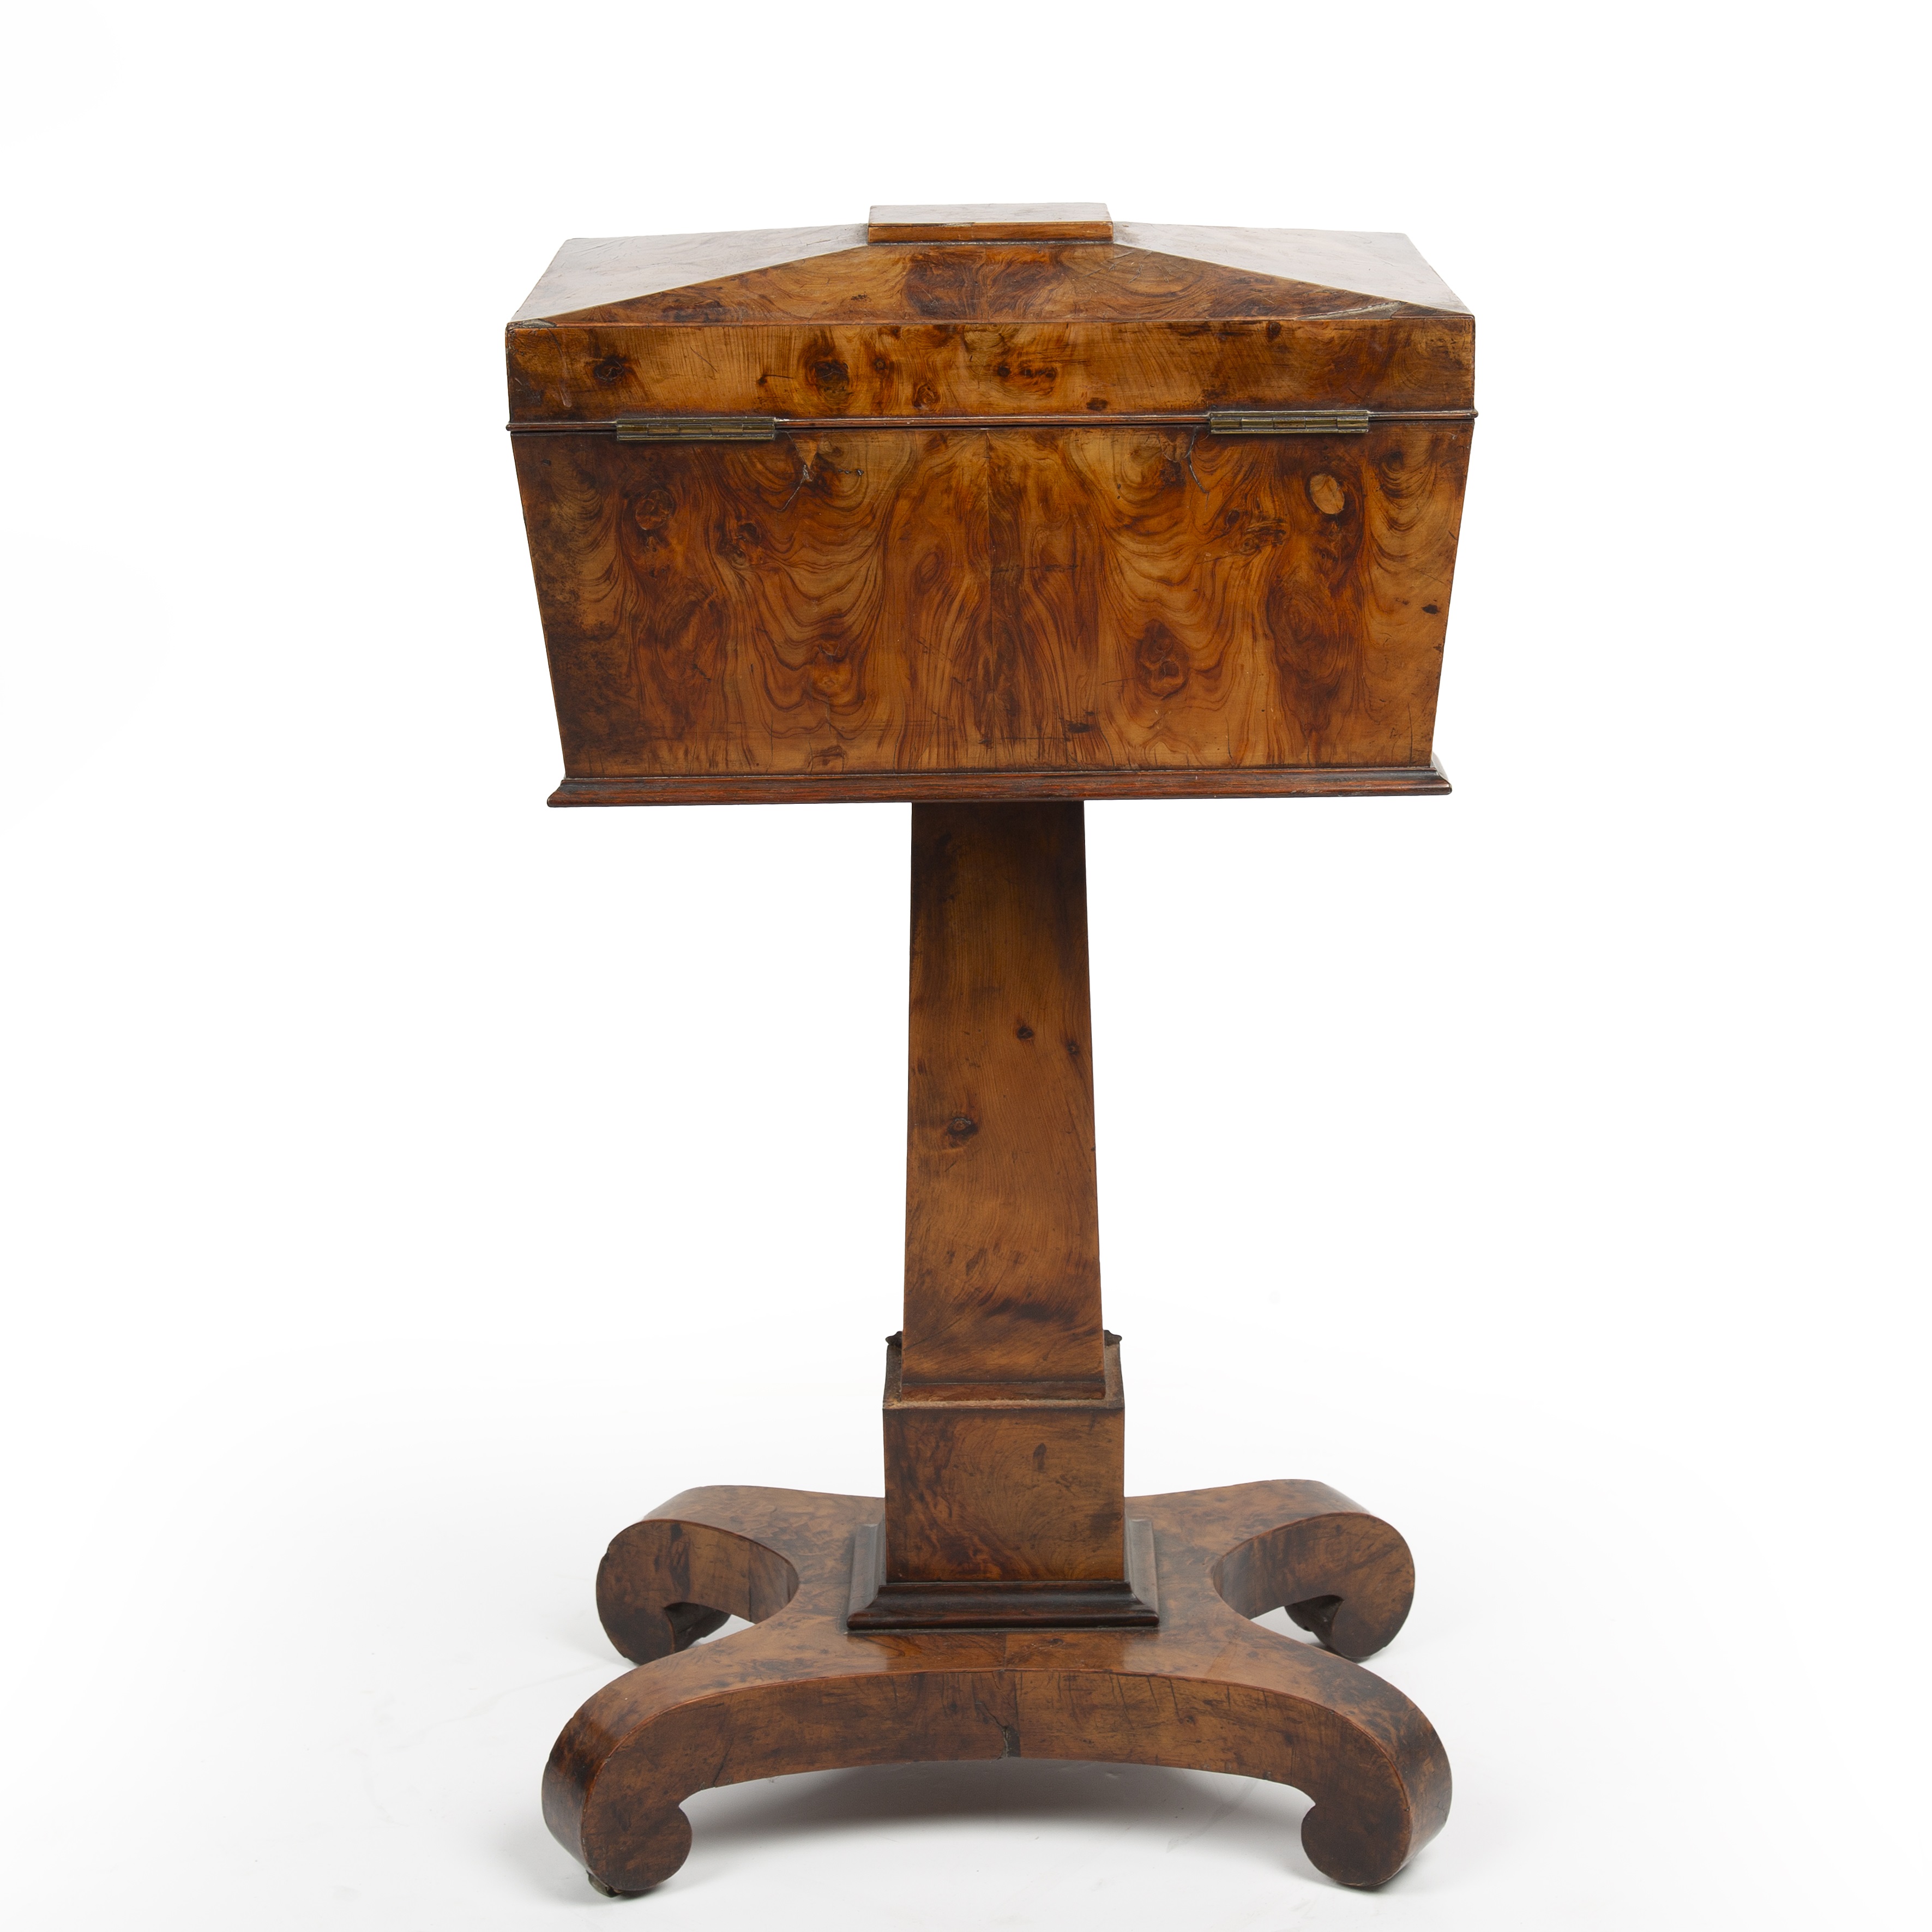 An early 19th century burr yew wood teapoy of sarcophagus form, the top opening to reveal a - Image 3 of 3